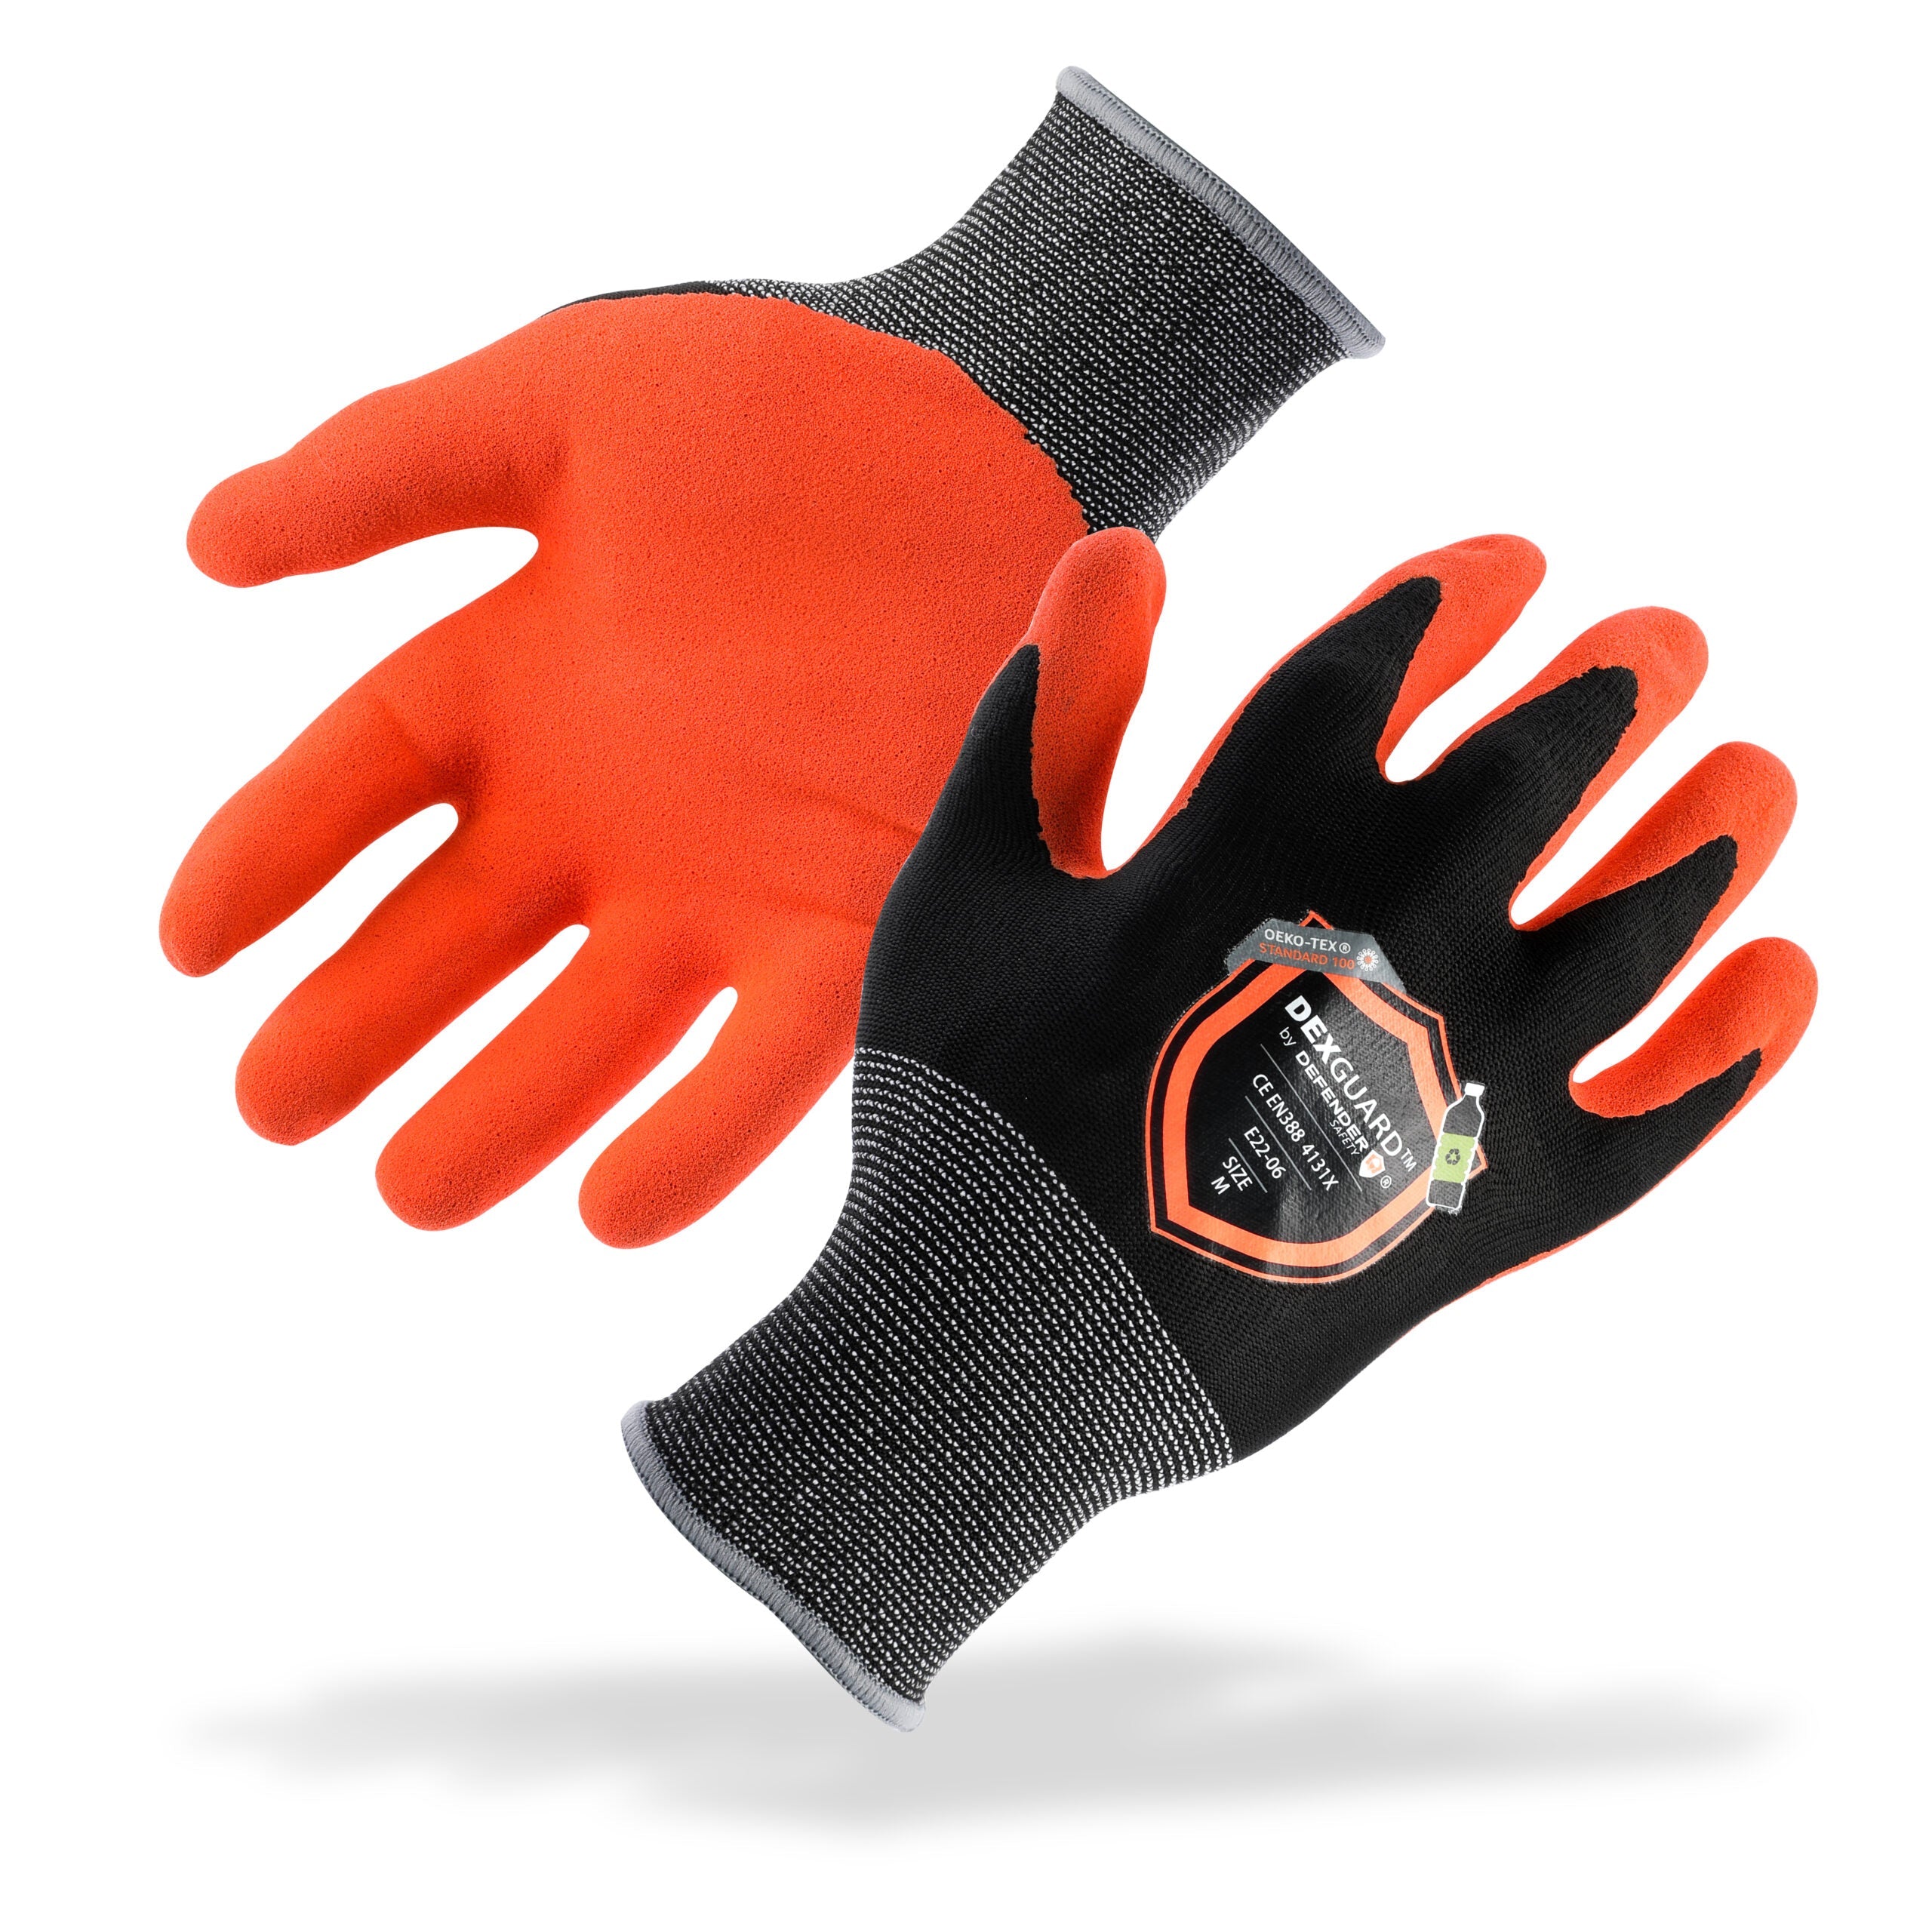 A6 Cut Resistant Gloves, Level 4 Abrasion Resistant, Textured Nitrile Coating, Touch Screen Compatible DEXGUARD, 2XL / 1 Pair